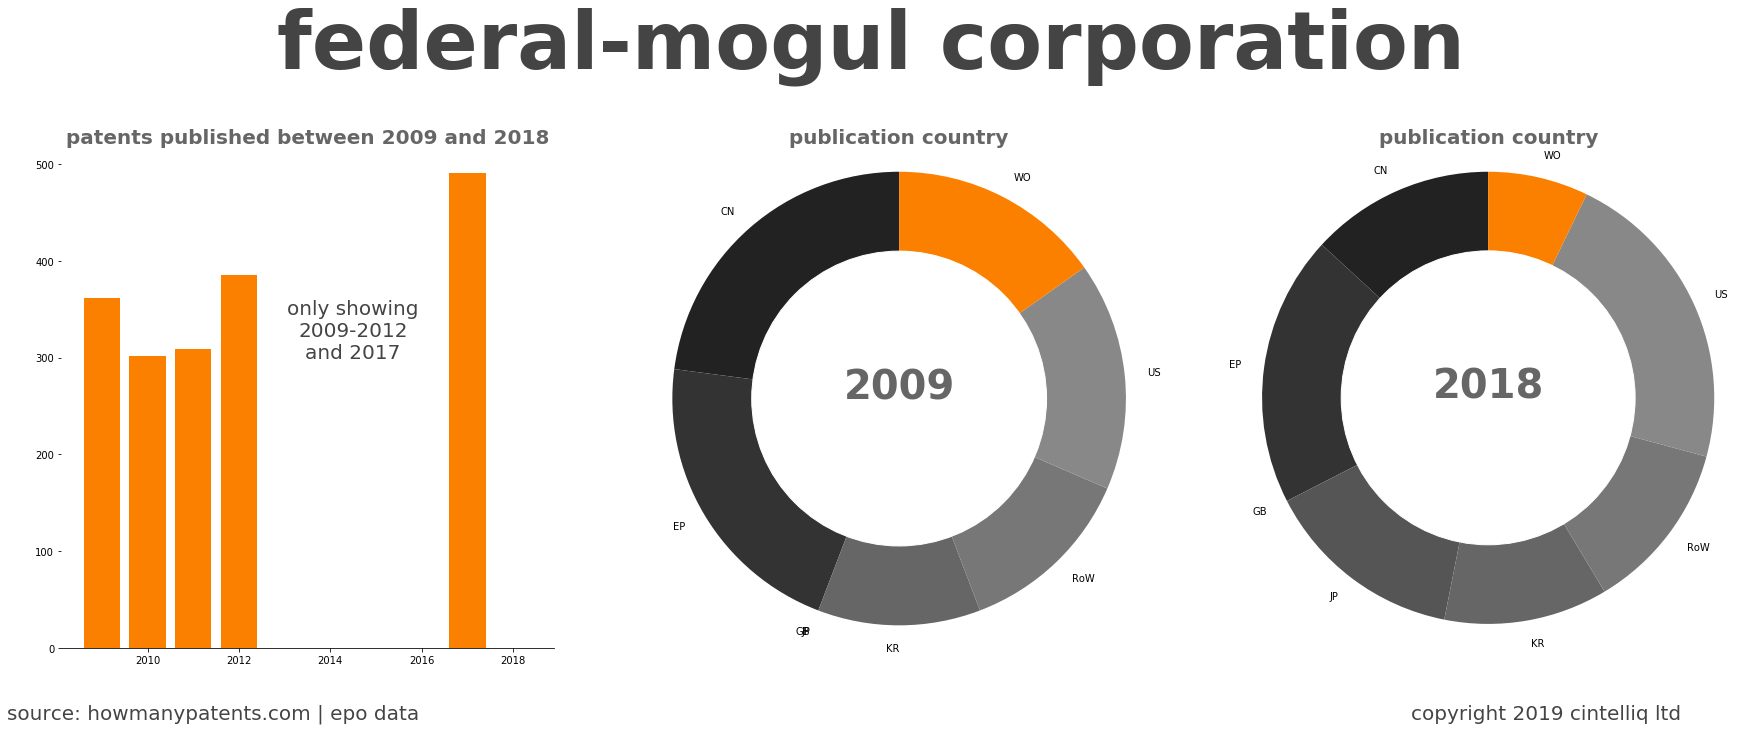 summary of patents for Federal-Mogul Corporation